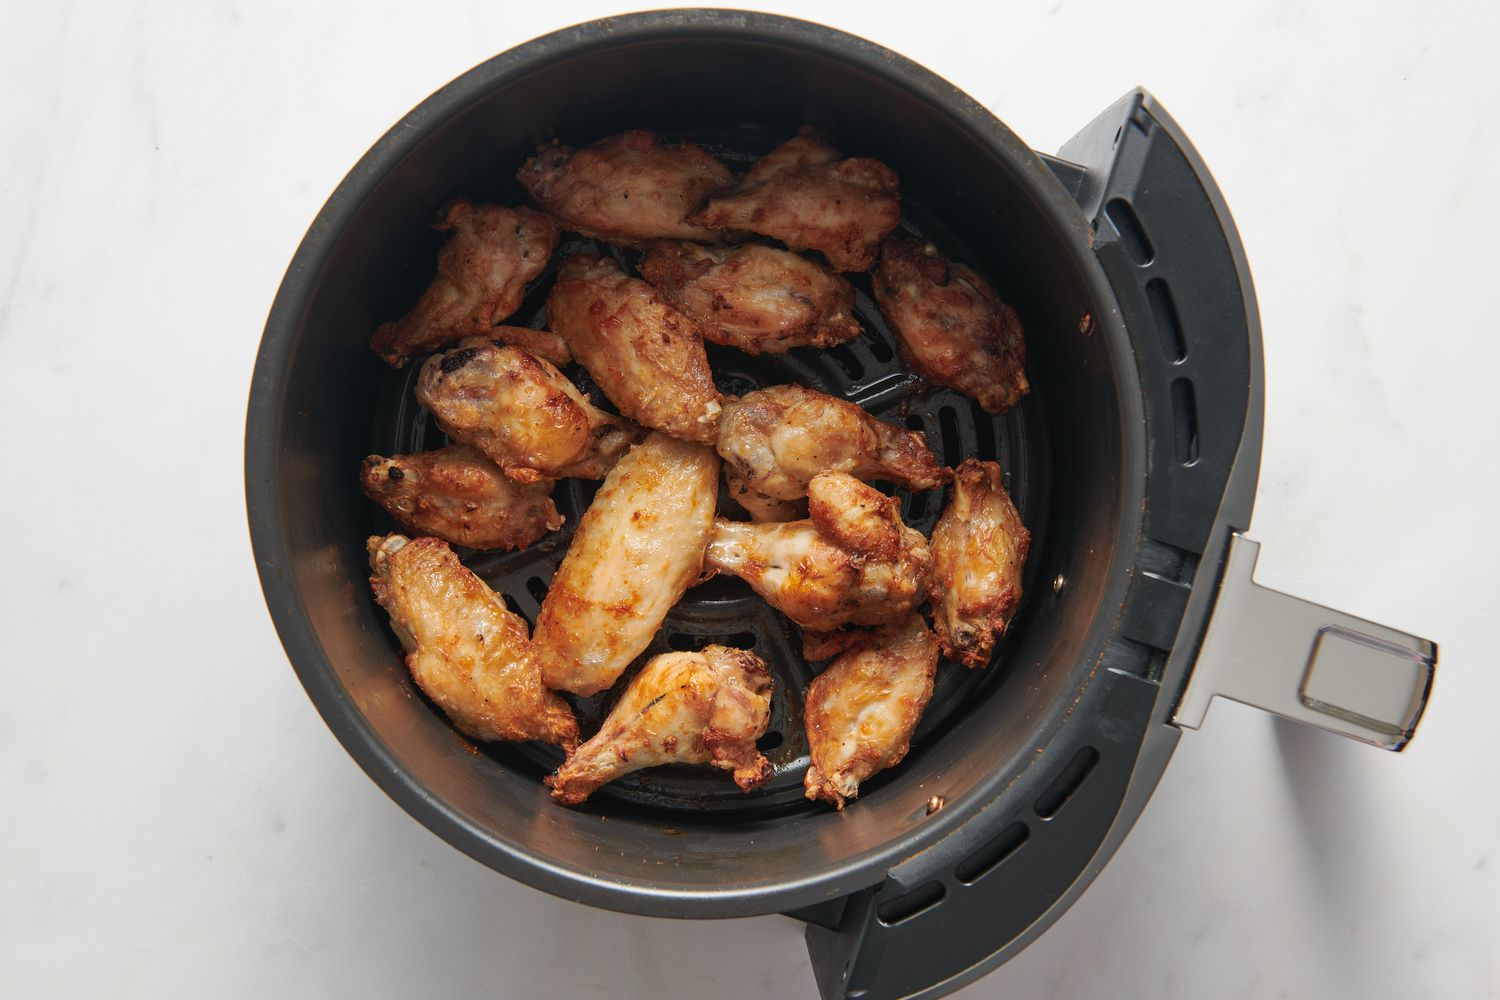 Partially cooked chicken wings in an air fryer basket